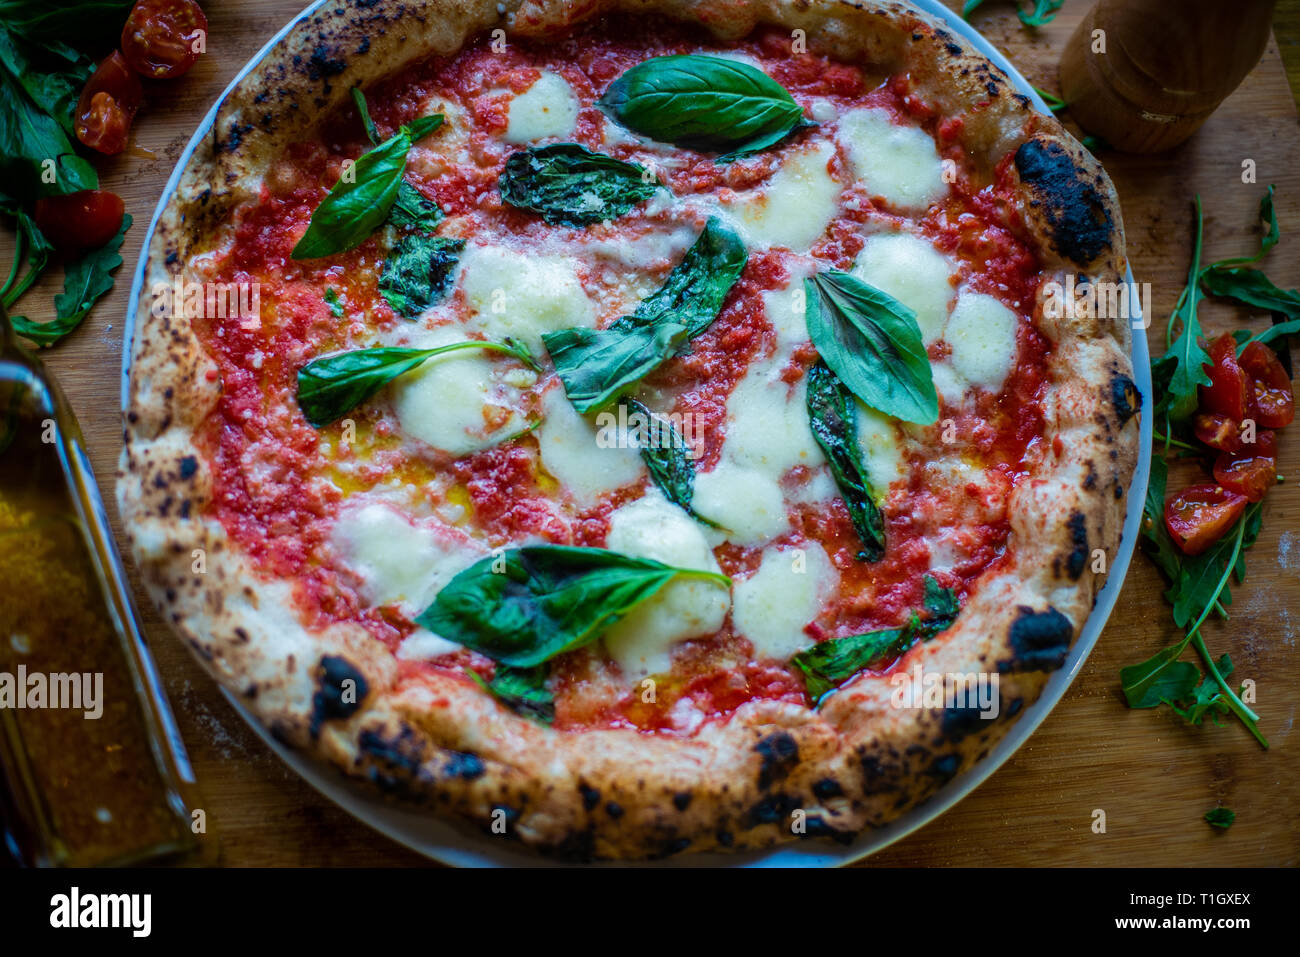 Wood fired pizza. A traditional authentic neapolitan style wood fired pizza on table in a pizzeria trattoria restaurant Stock Photo